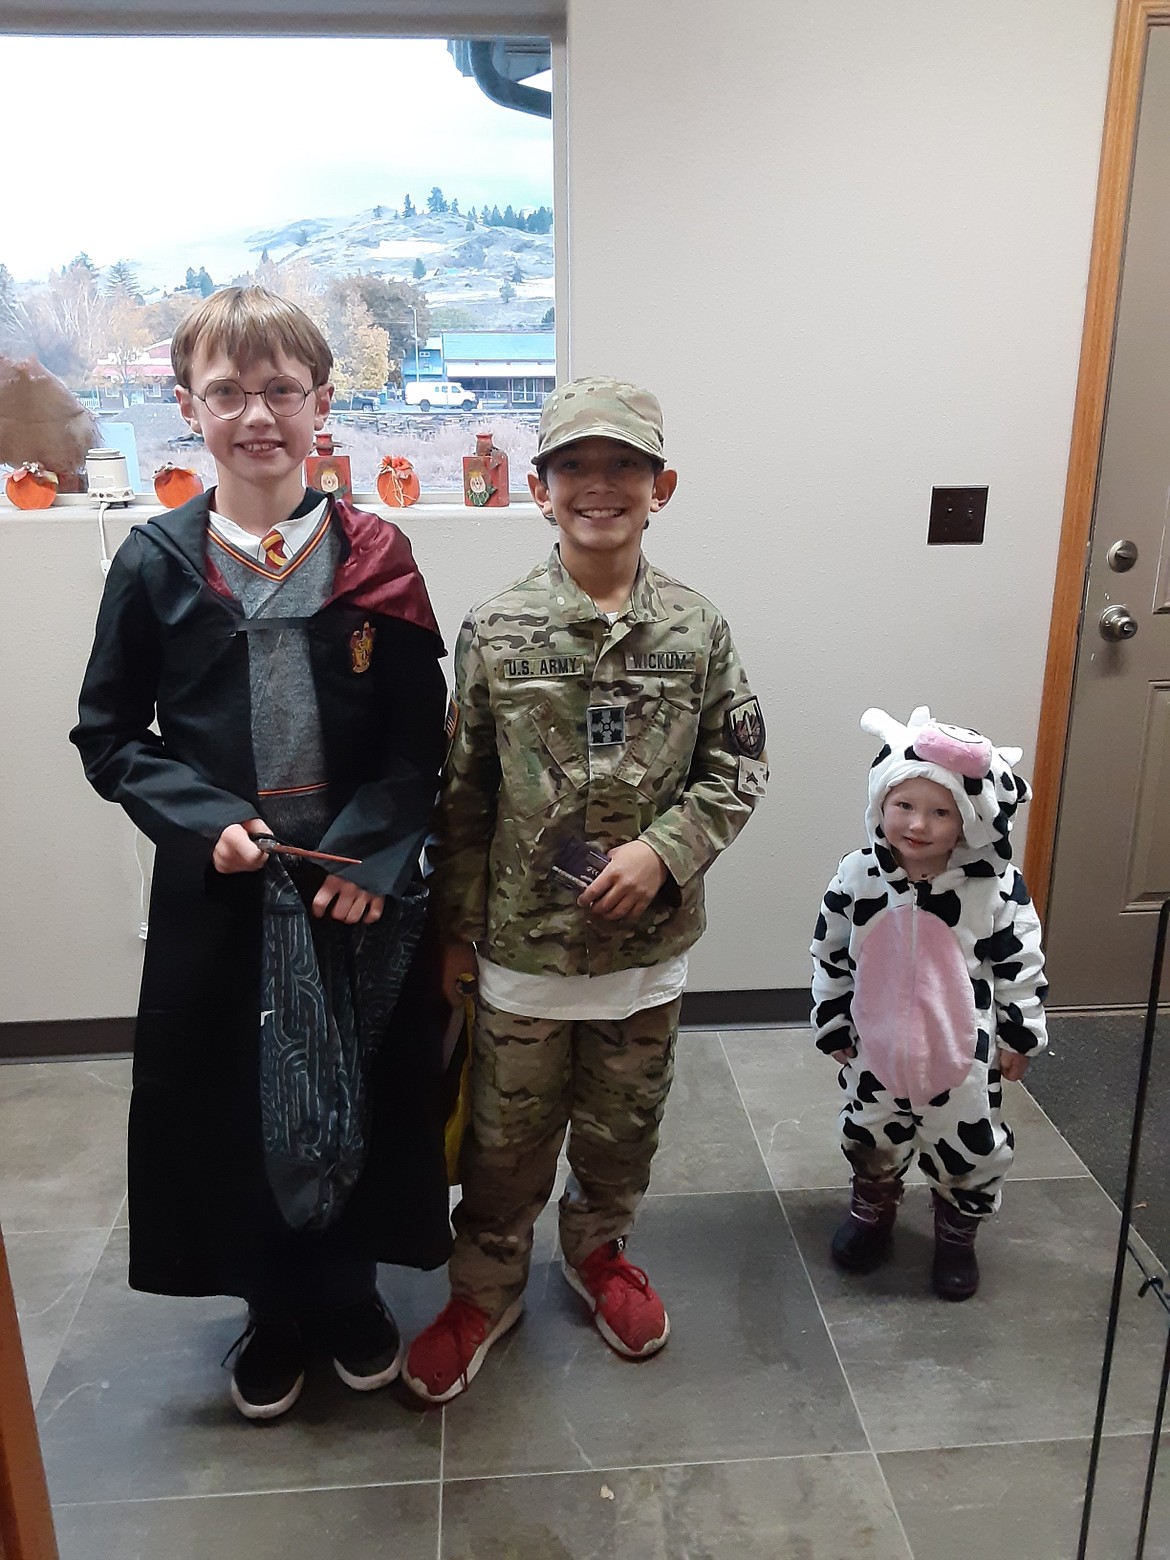 Harry Potter, an Army soldier and a "Mooey."